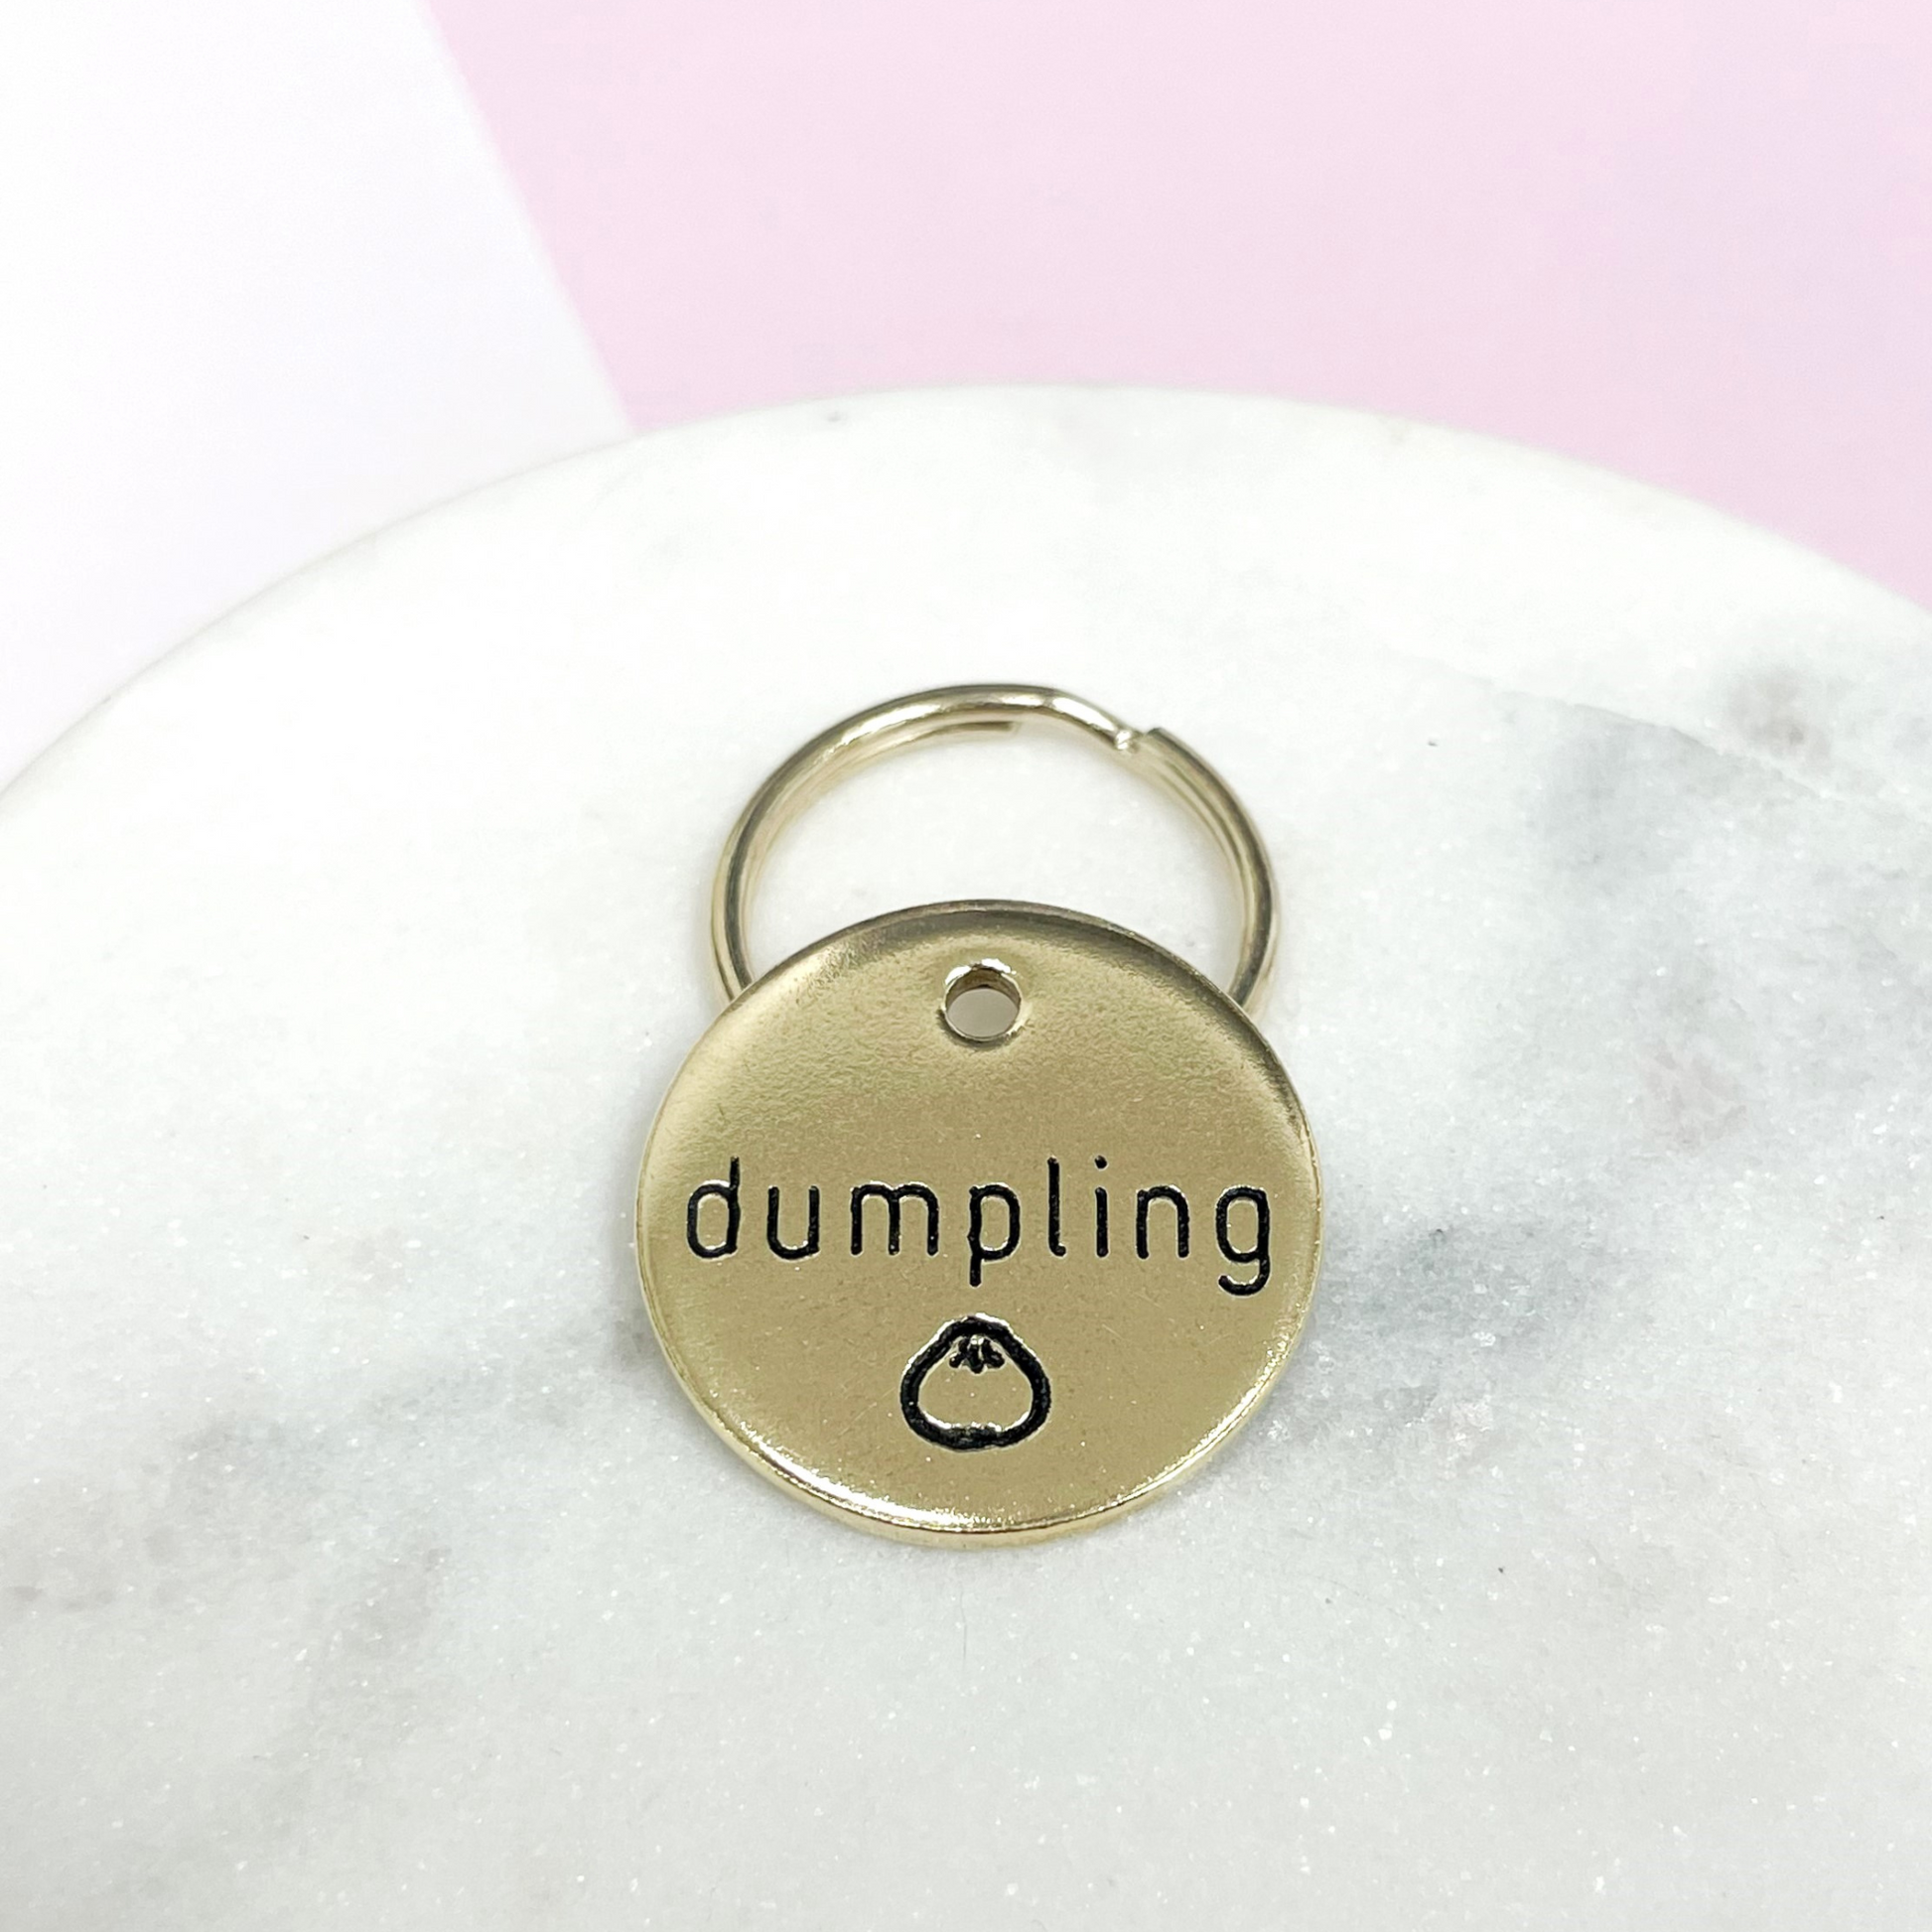 Personalized Dog Tag - Dumpling Design Engraved Dog Tag - Dumpling Design Tag - Cat ID Tag - Dog Collar Tag - Custom Dog Tag - Personalized Tag - Pet ID Tag - Pet Name Tag - Food Themed Dog Tag 